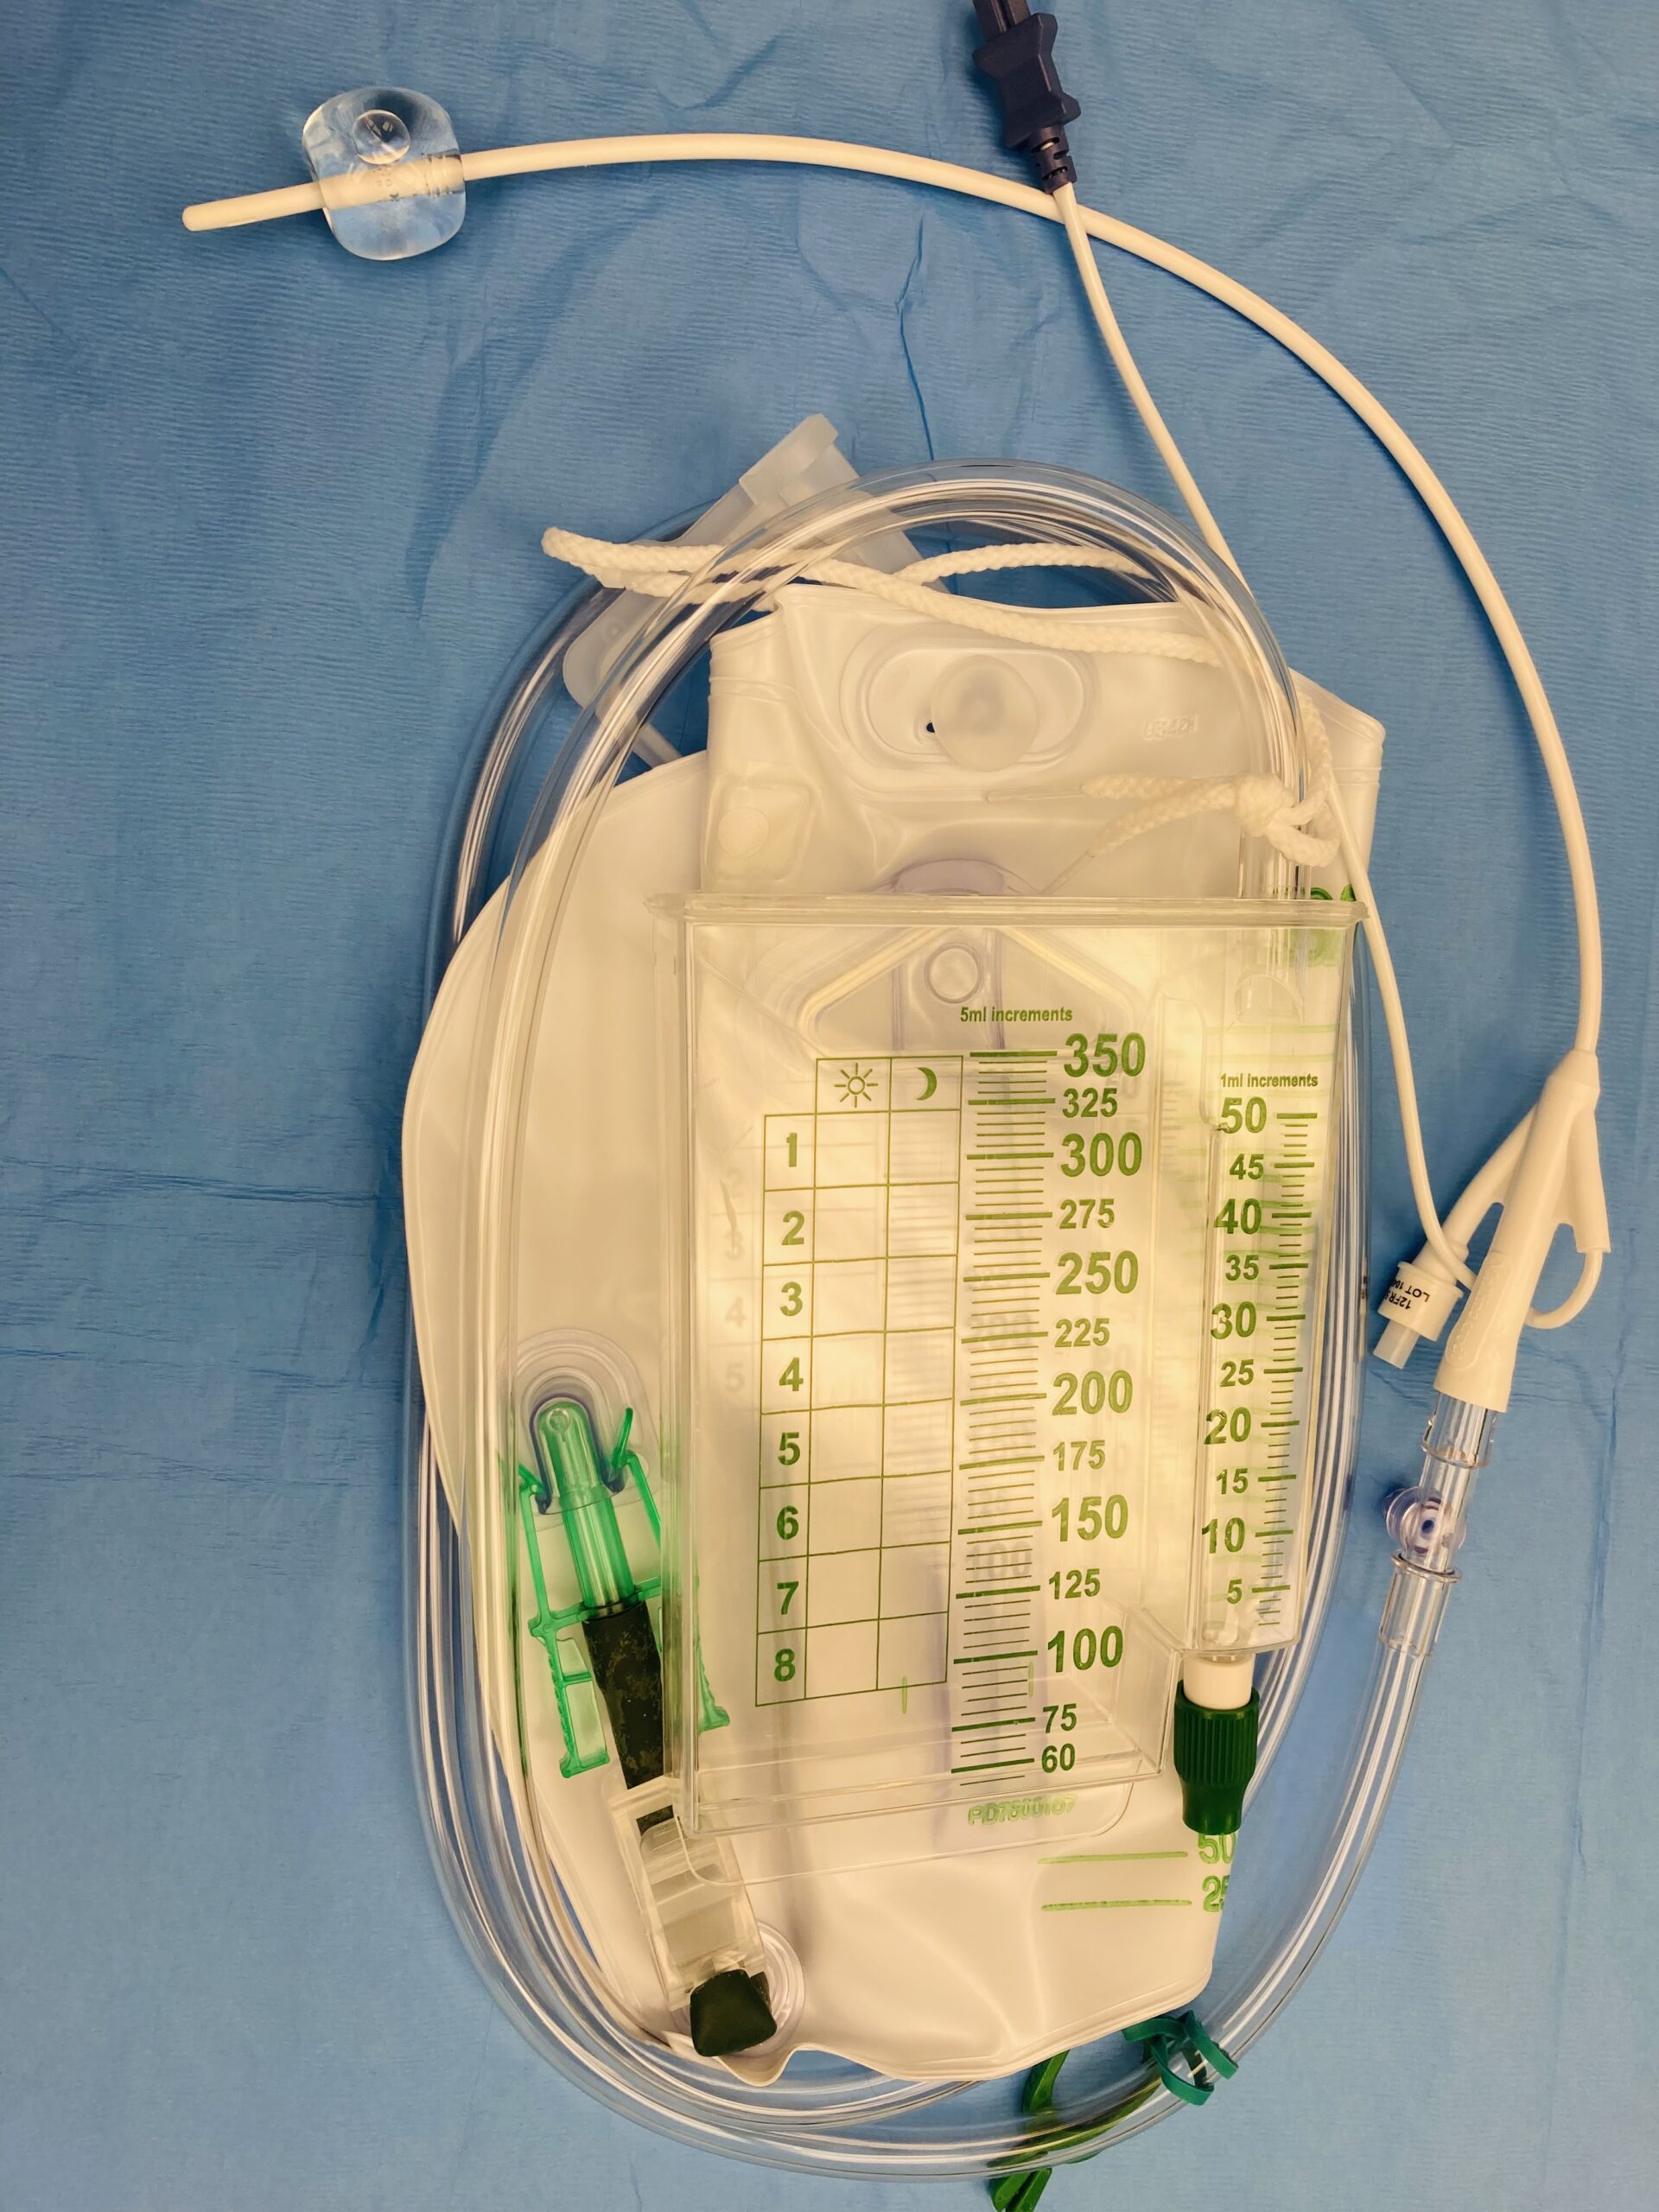 Foley catheter with temperature probe and urine catch bag attached